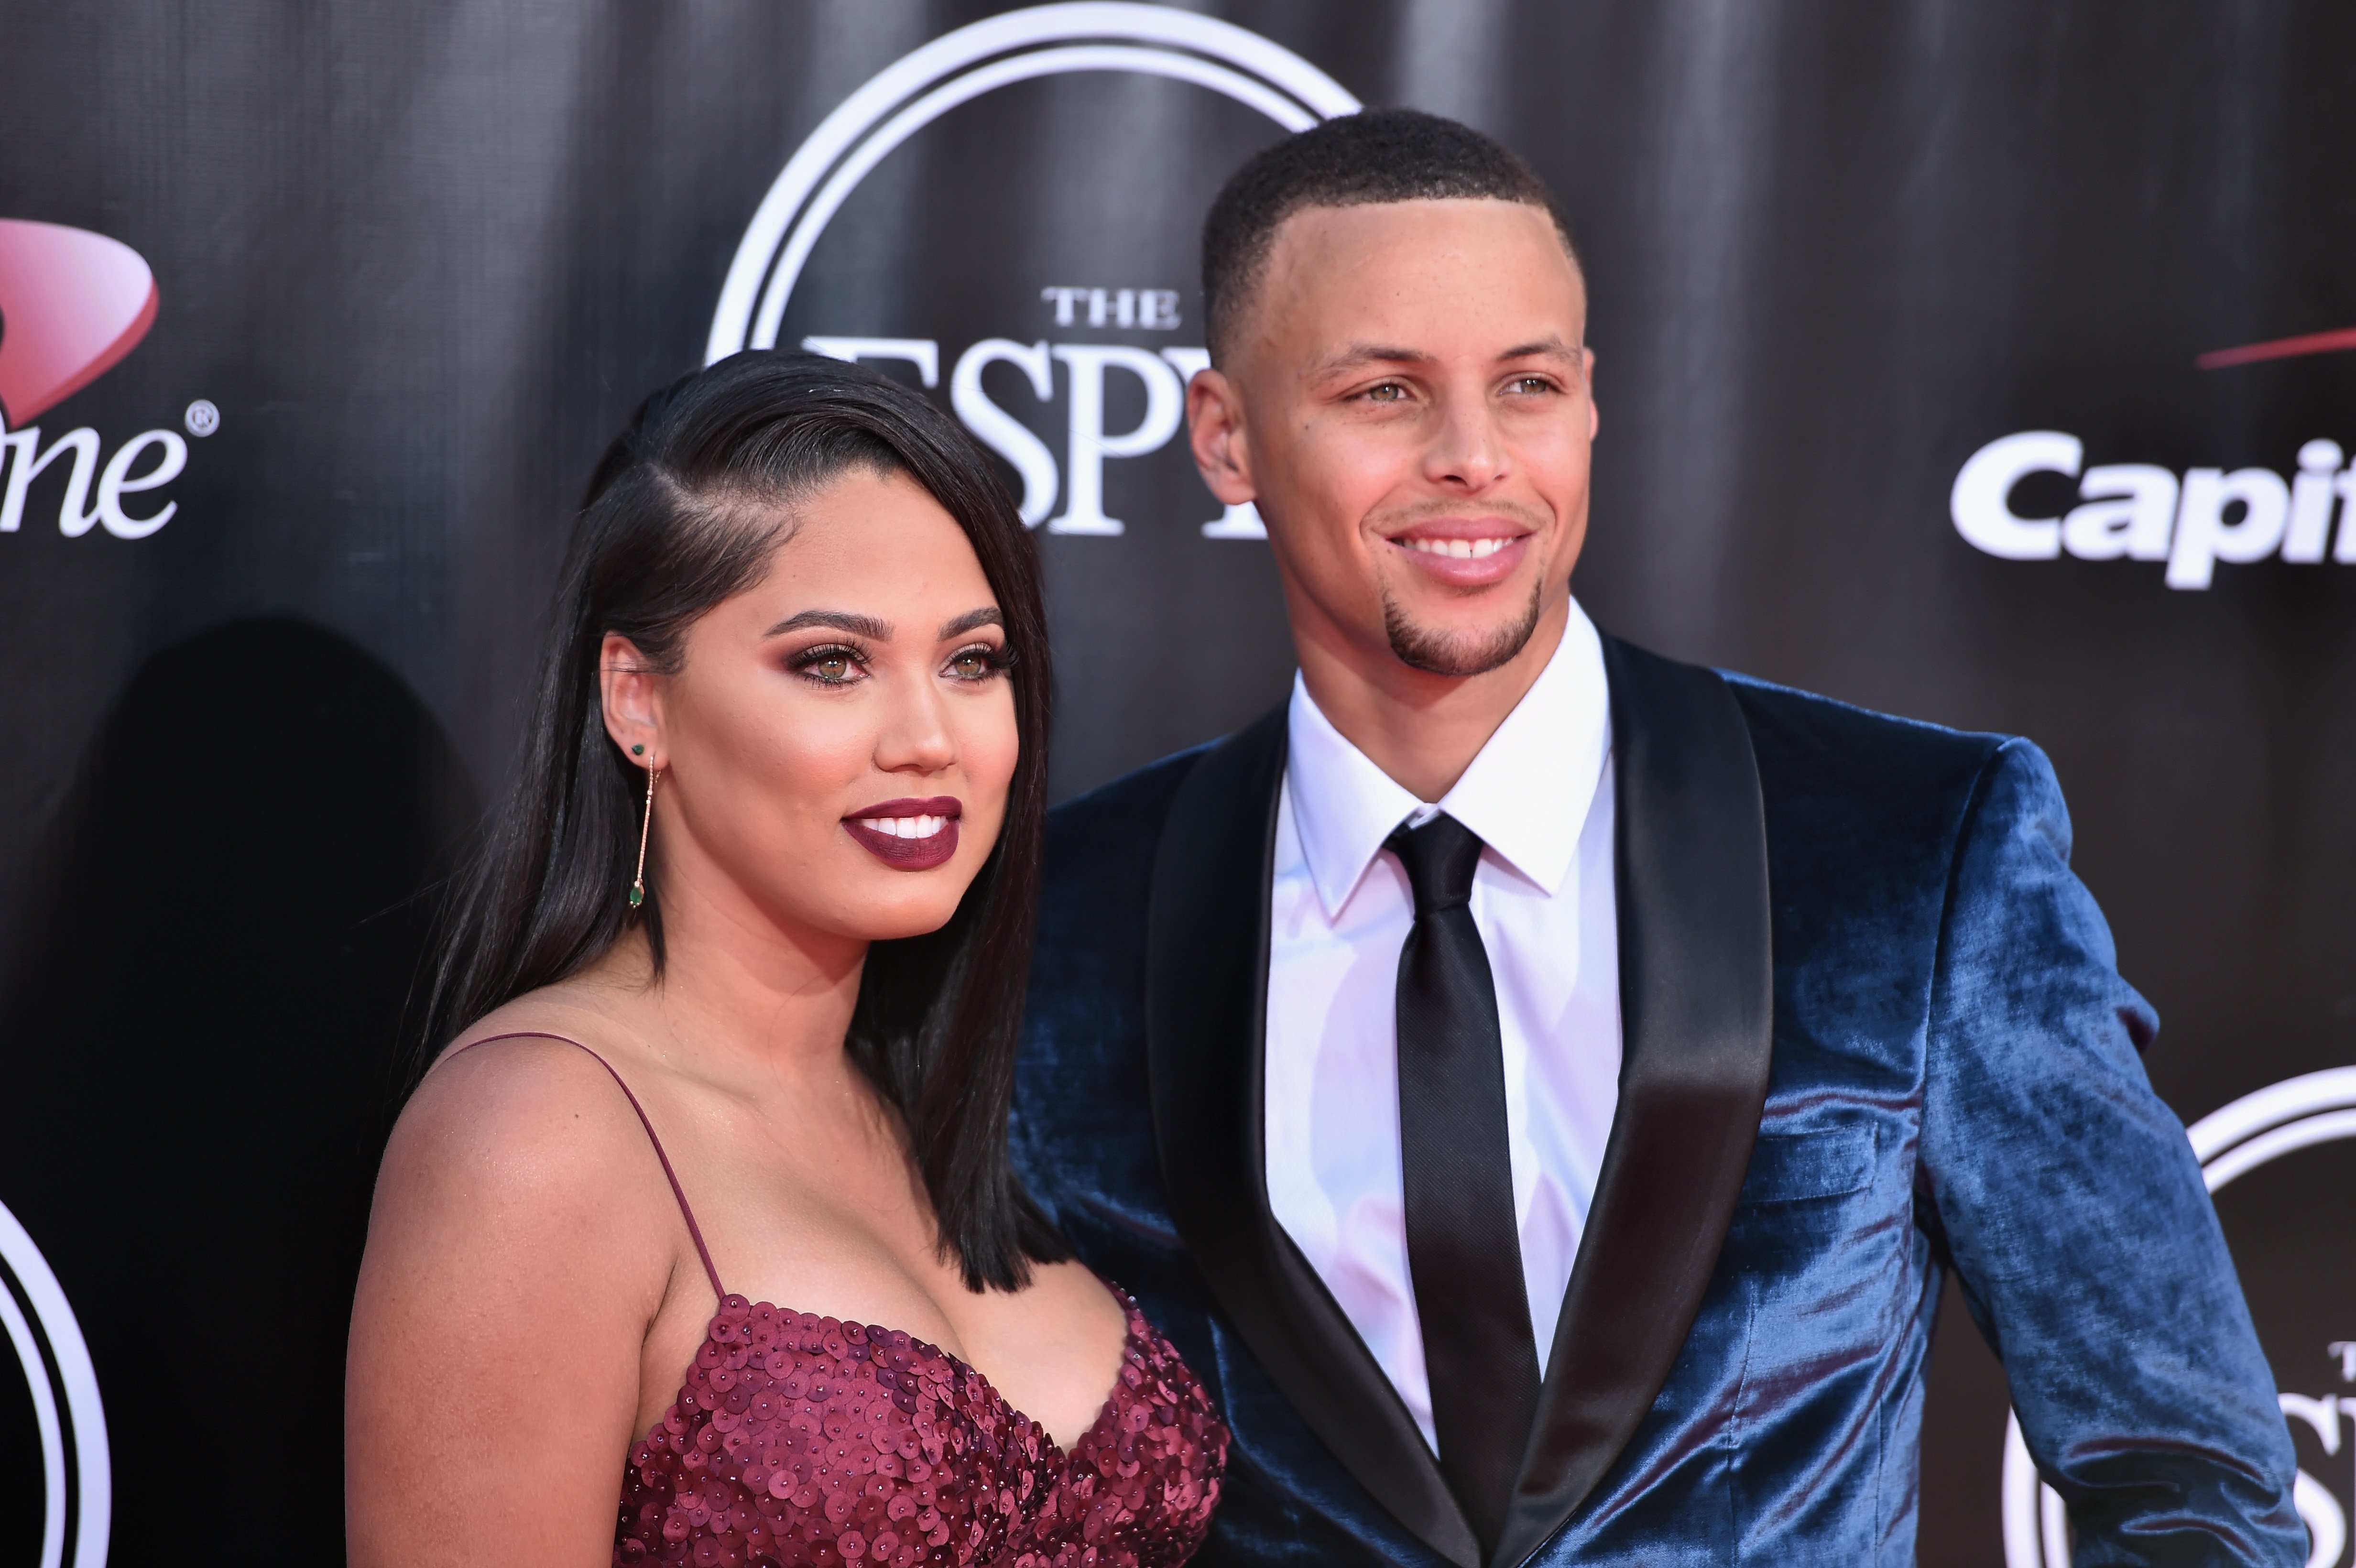 Stephen Curry and Ayesha Curry attend the 2016 ESPYS at Microsoft Theater on July 13, 2016 | Photo: GettyImages